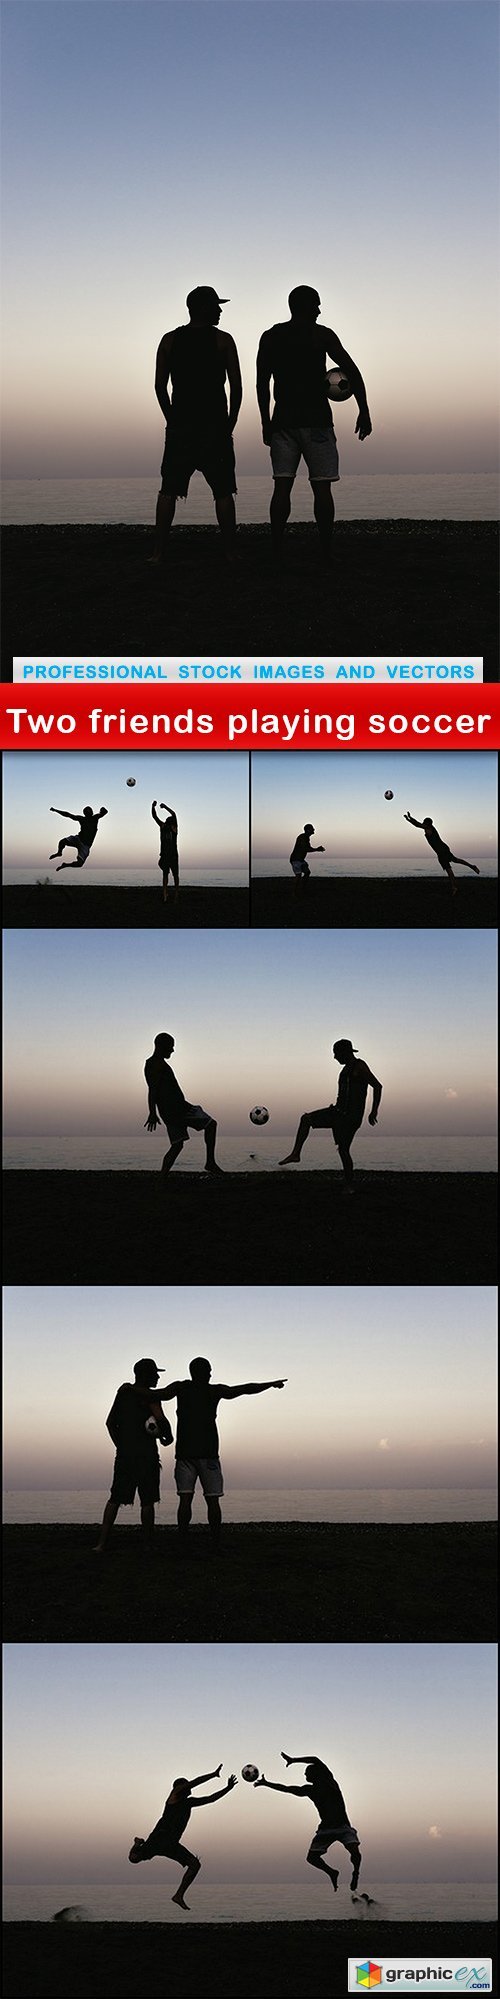 Two friends playing soccer - 6 UHQ JPEG